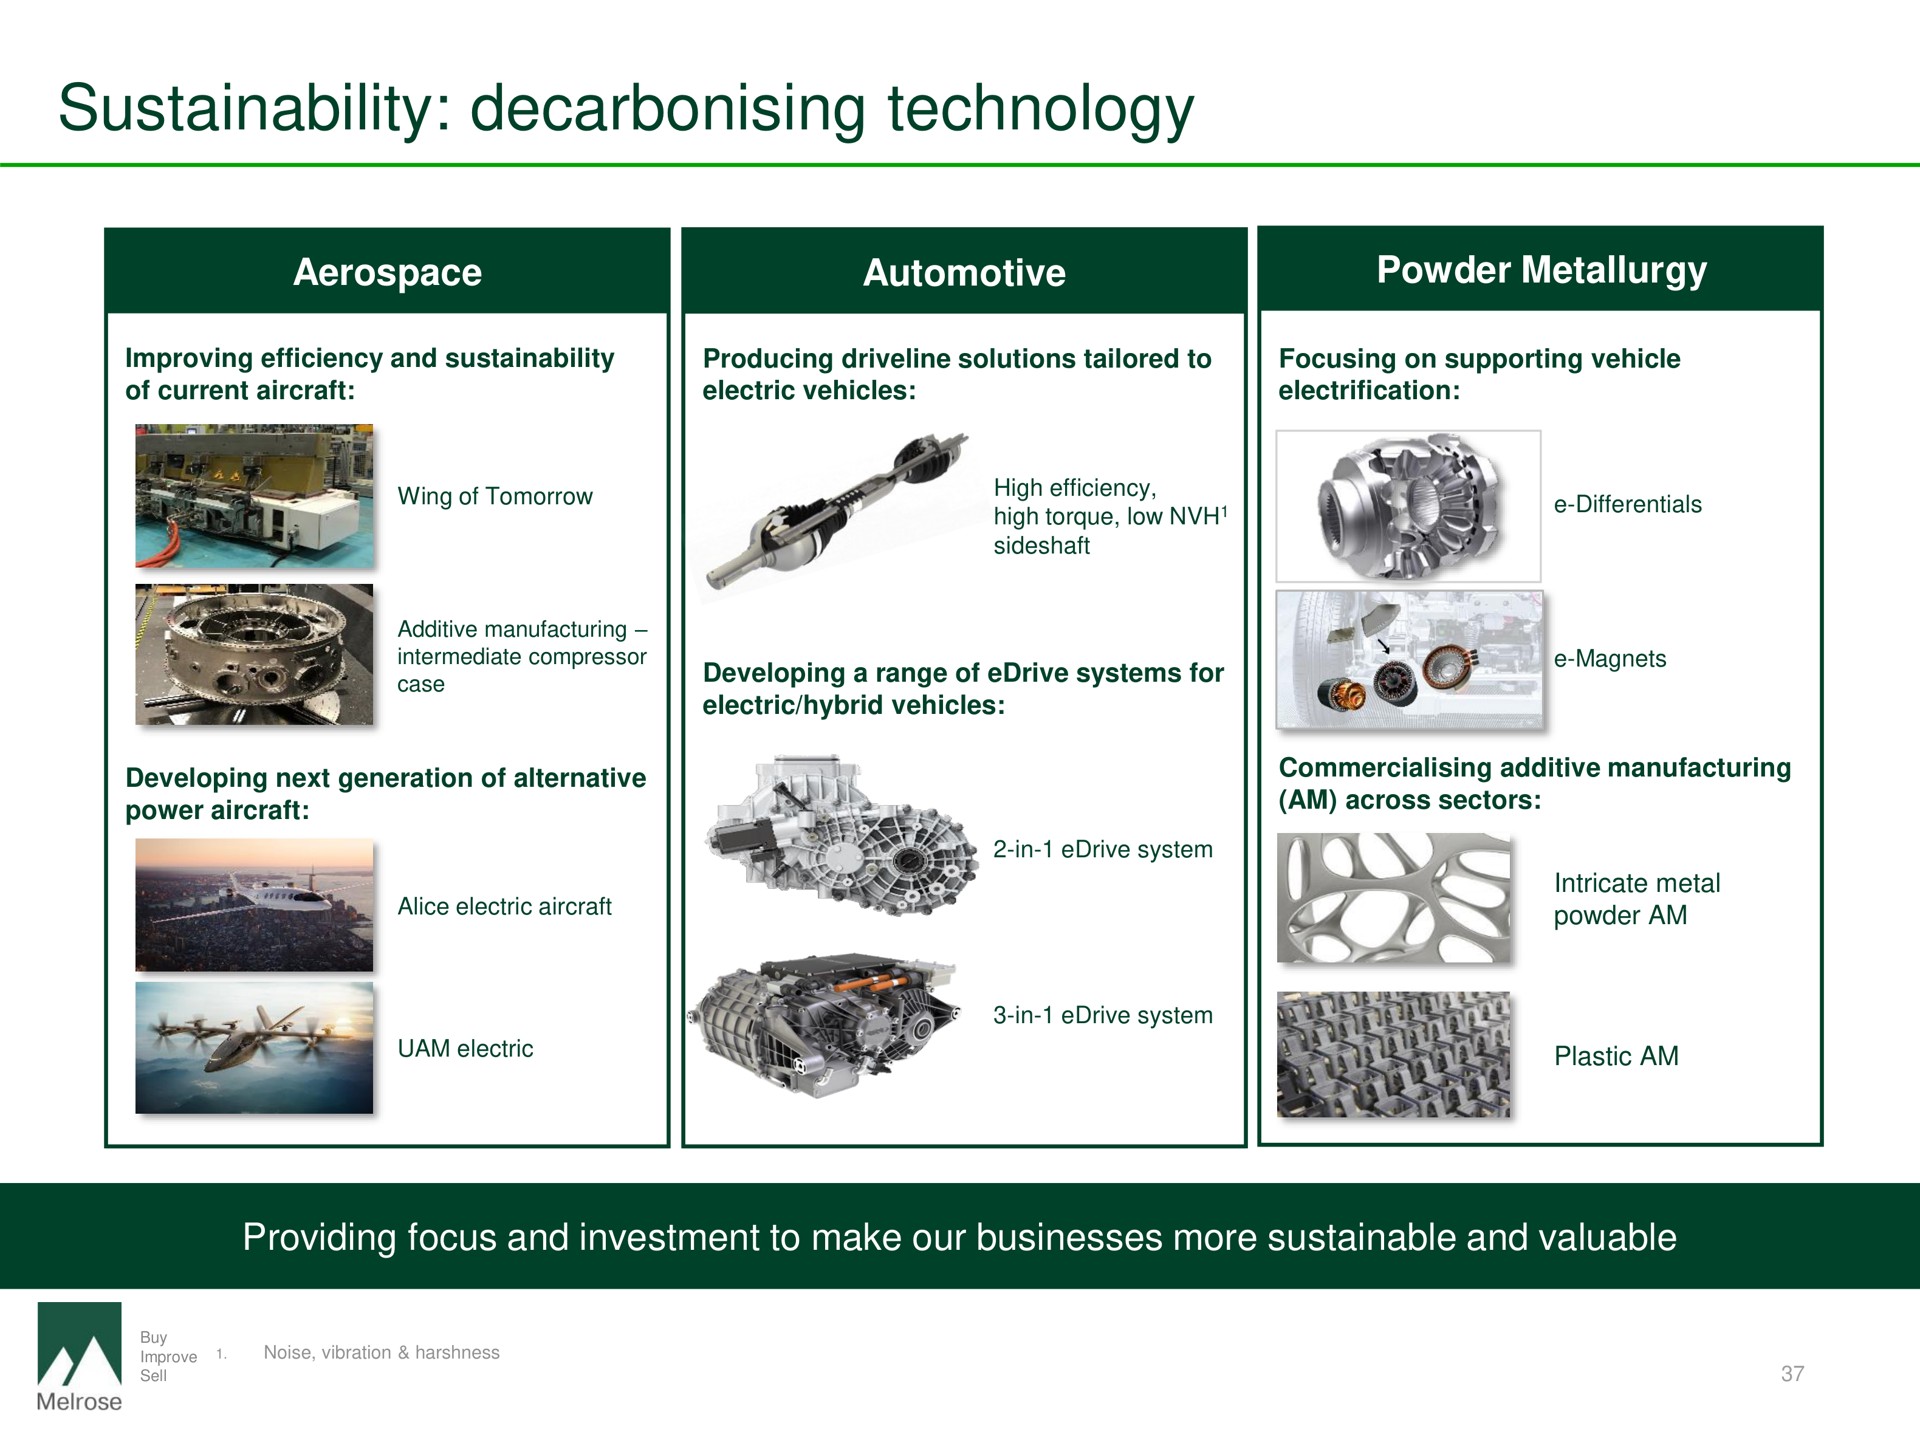 technology automotive powder metallurgy providing focus and investment to make our businesses more sustainable and valuable | Melrose